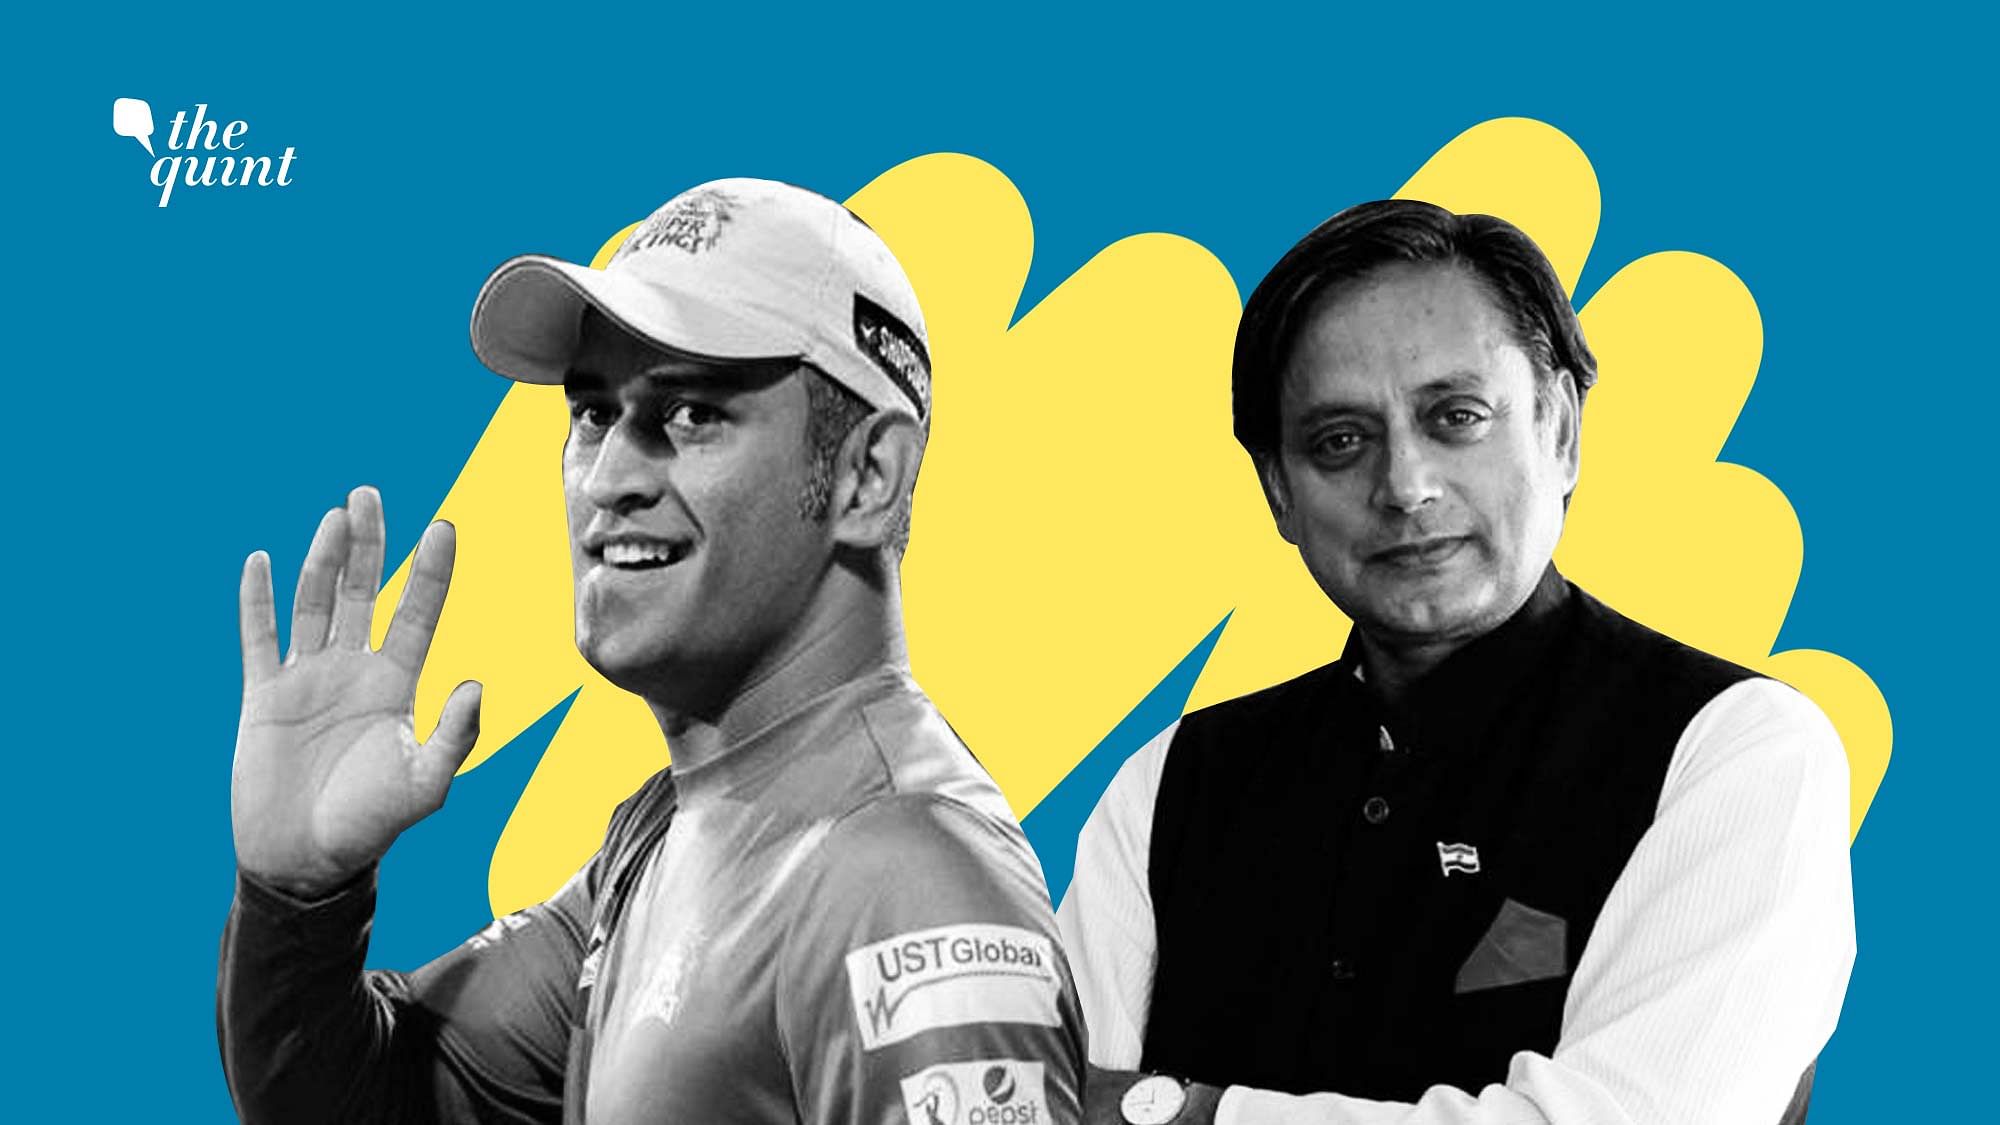 Image of MS Dhoni (L) and Dr Shashi Tharoor (R) used for representational purposes.